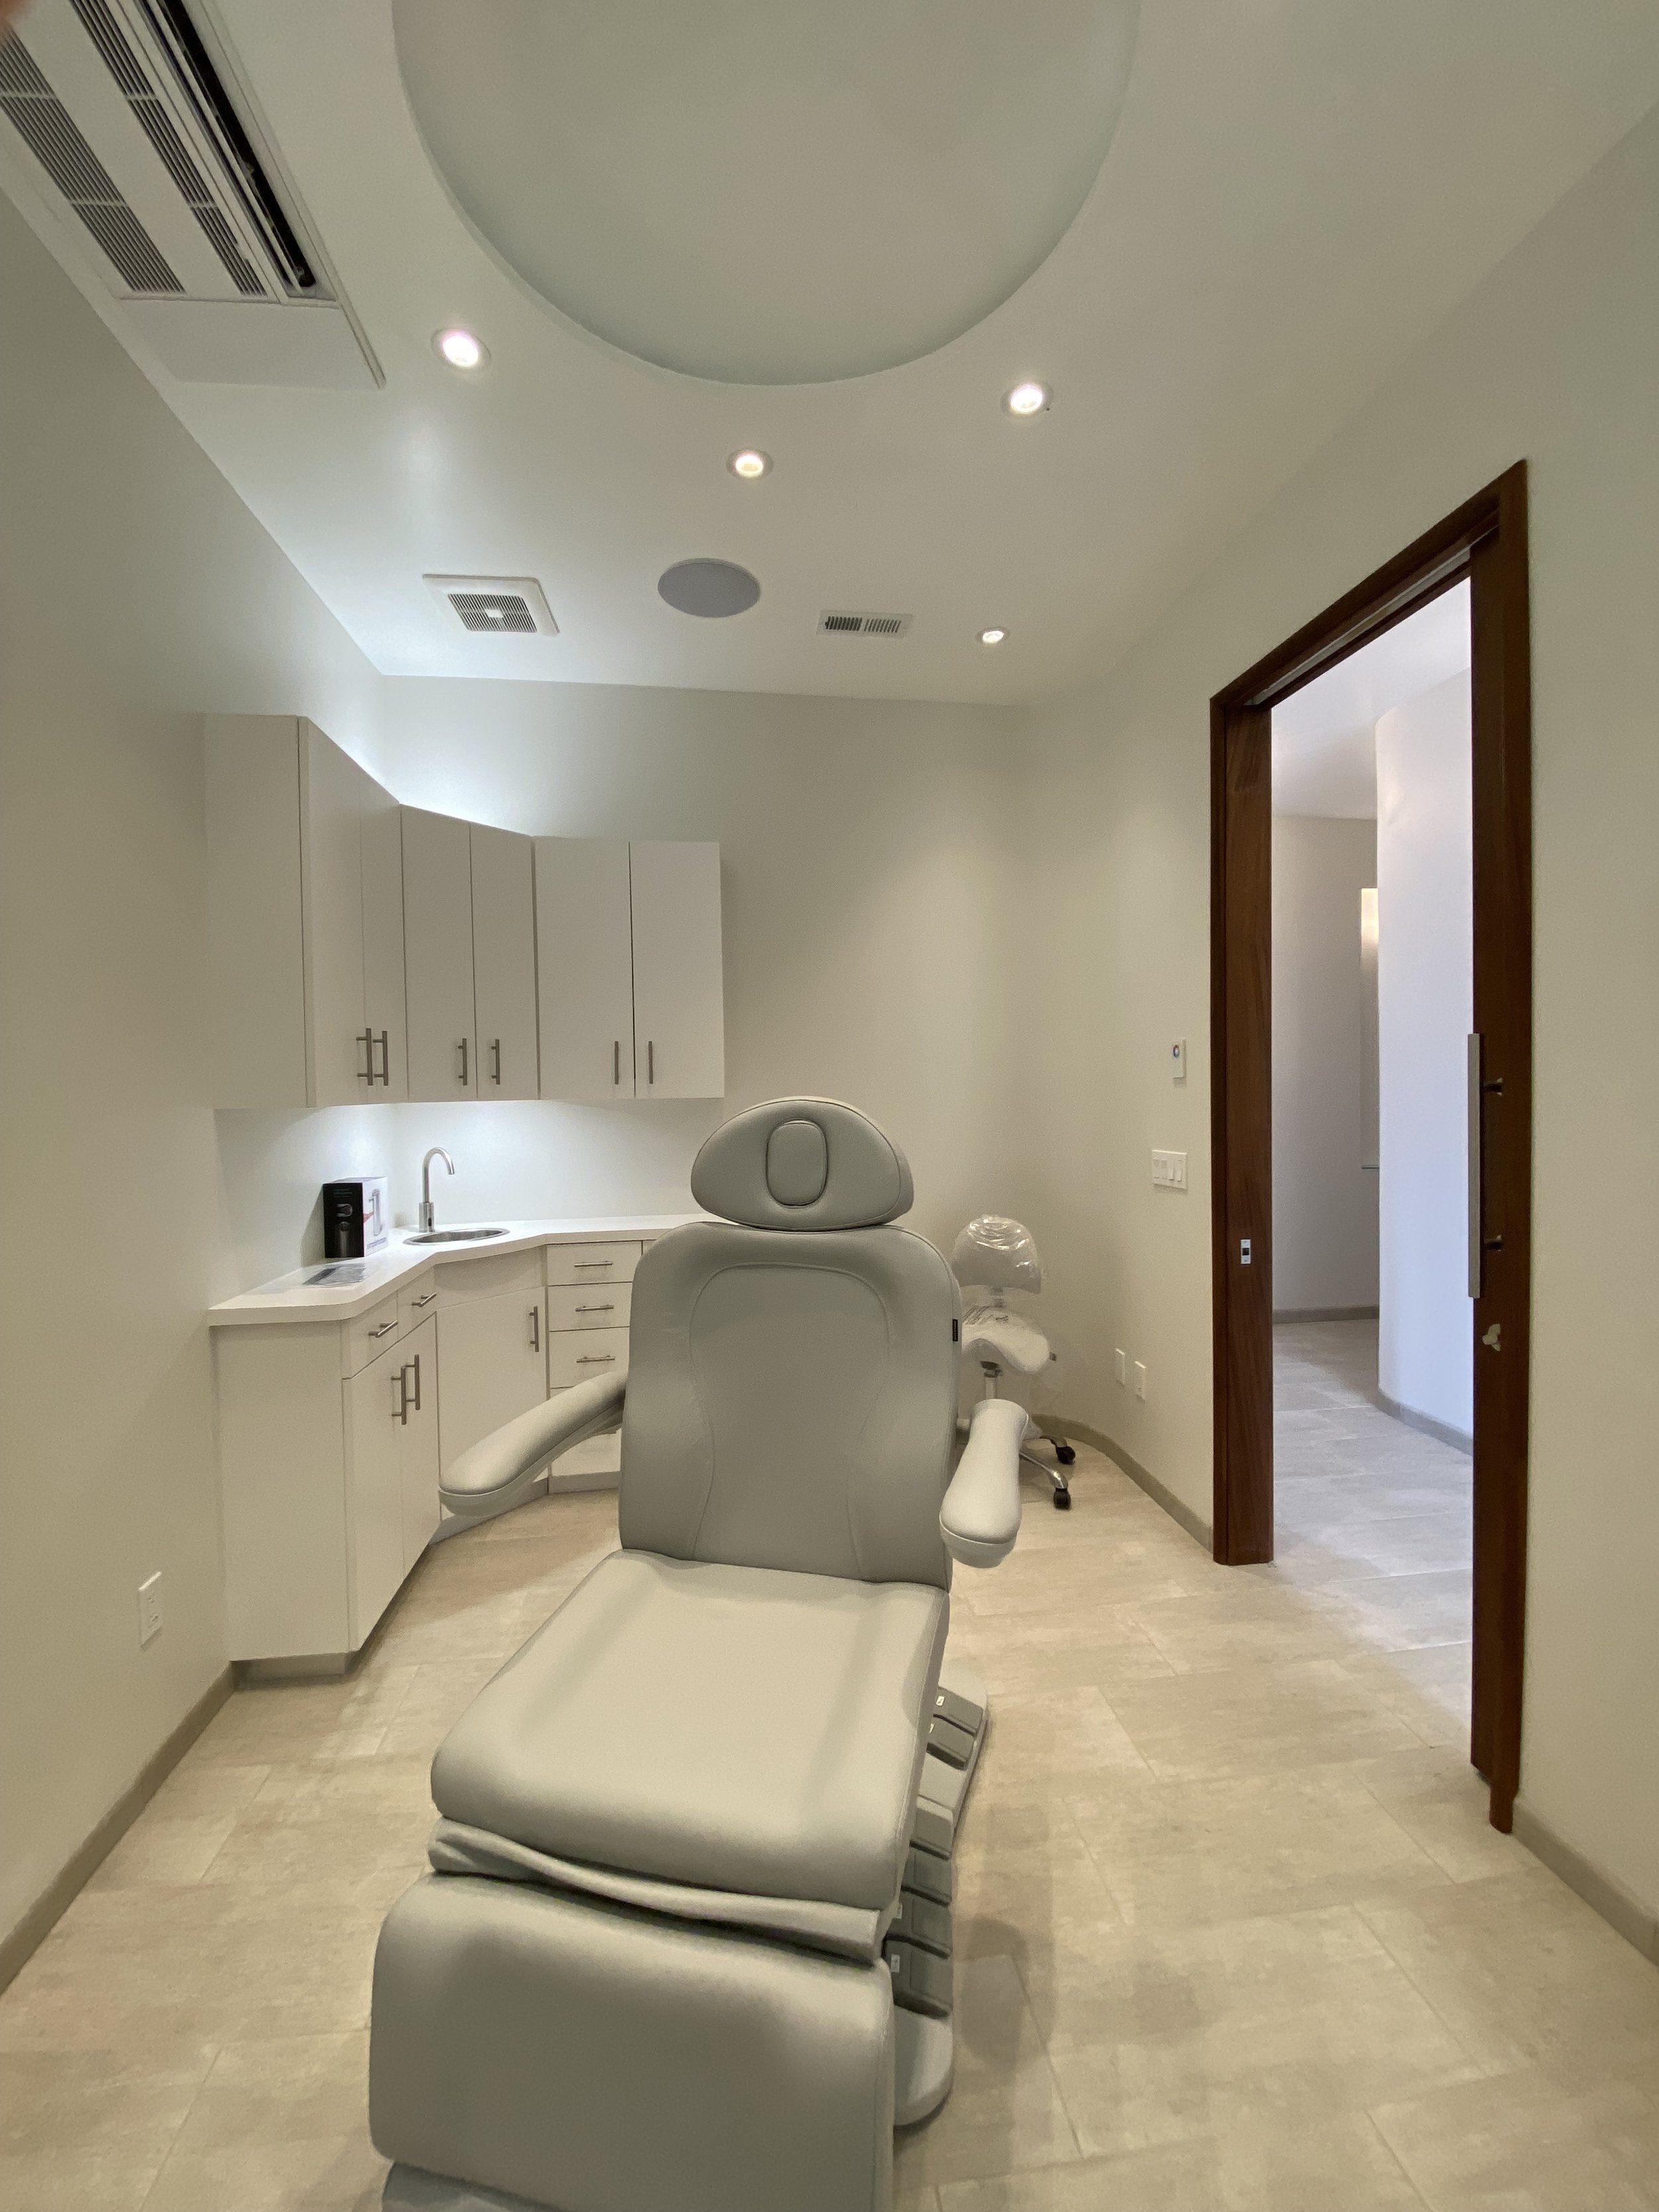 Treatment room with soffit ceiling